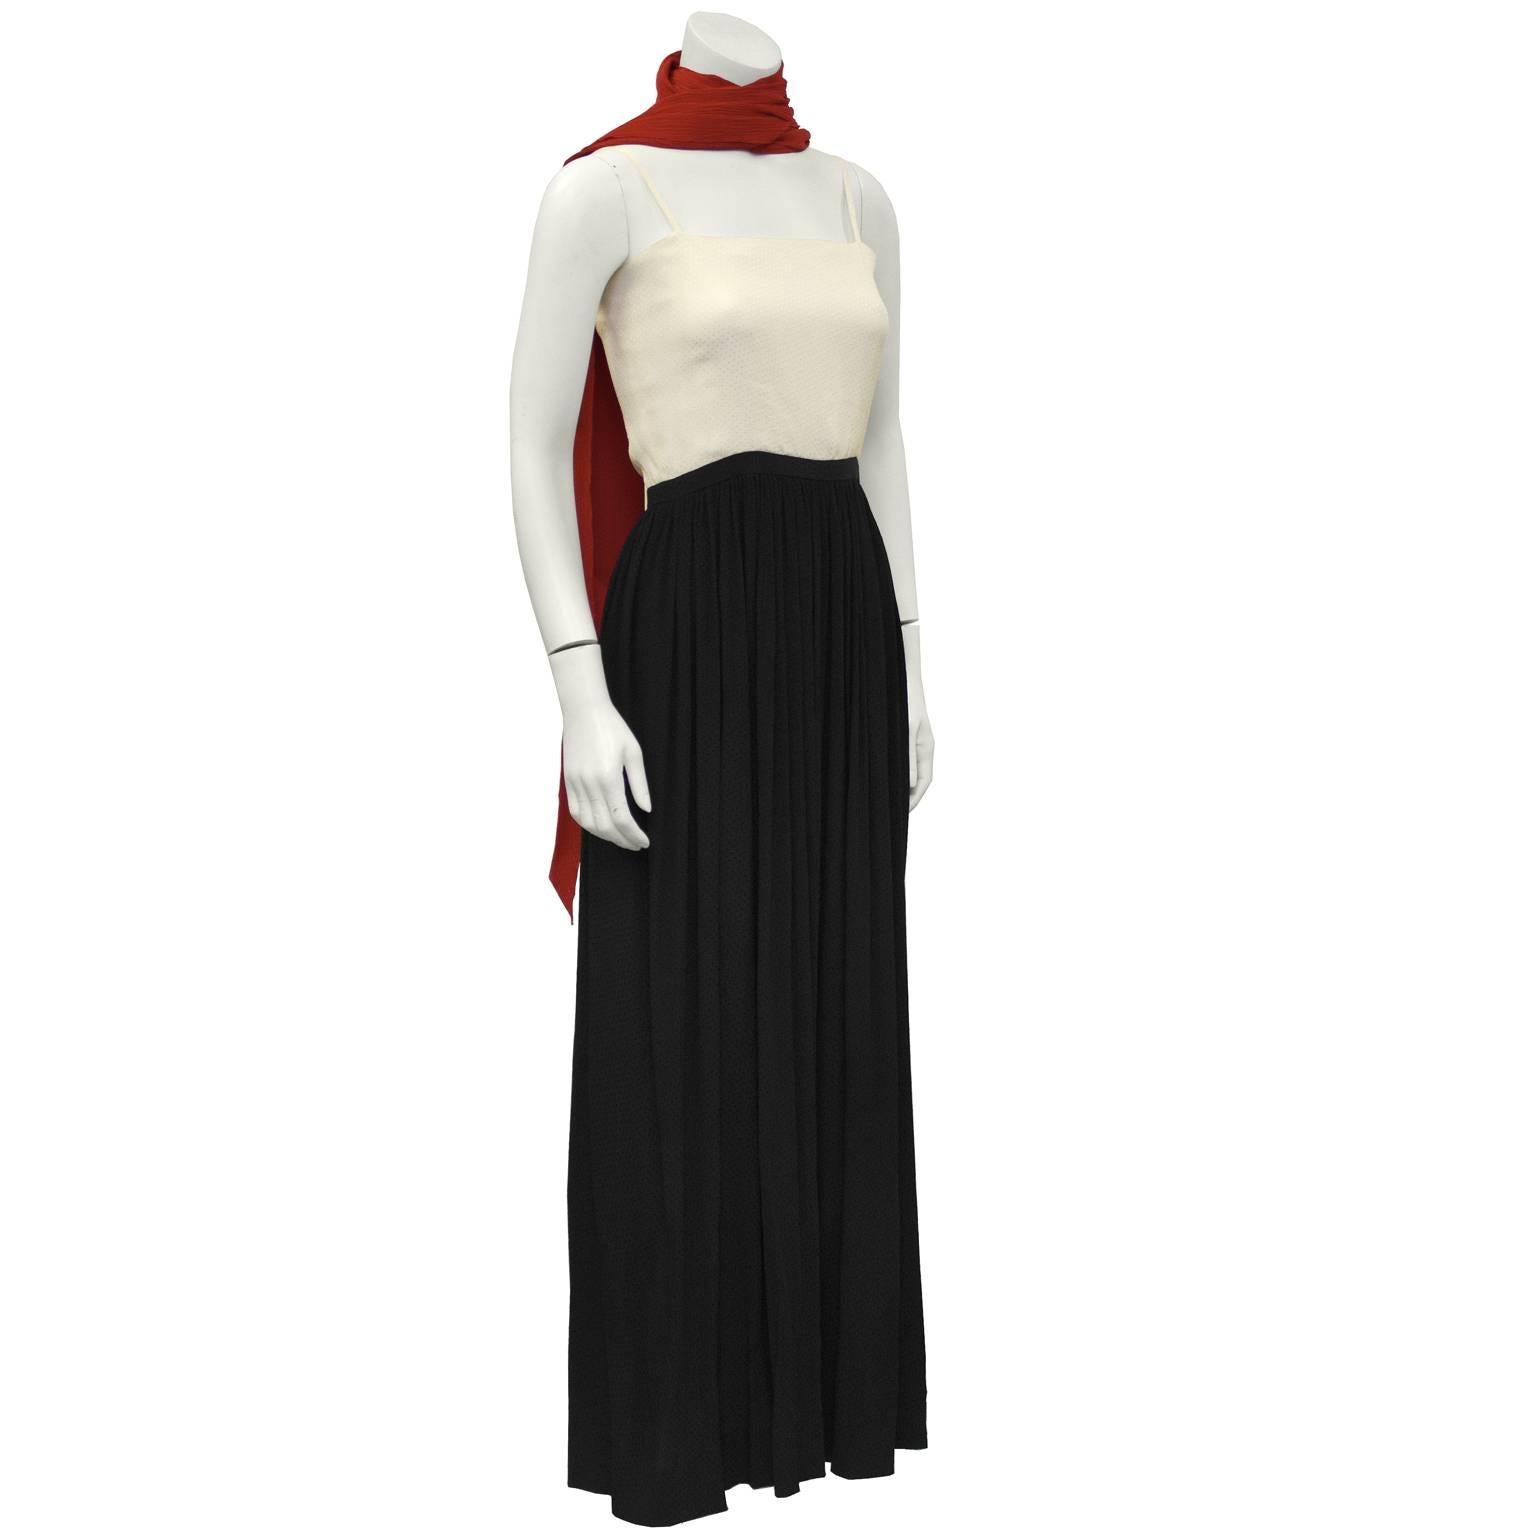 1970's color blocked silk jacquard gown with a matching red scarf. The camisole style neckline is cream and has thin straps. The waist is accented with a black band and a black over layer to the floor. The under layer of the gown is cream jacquard.